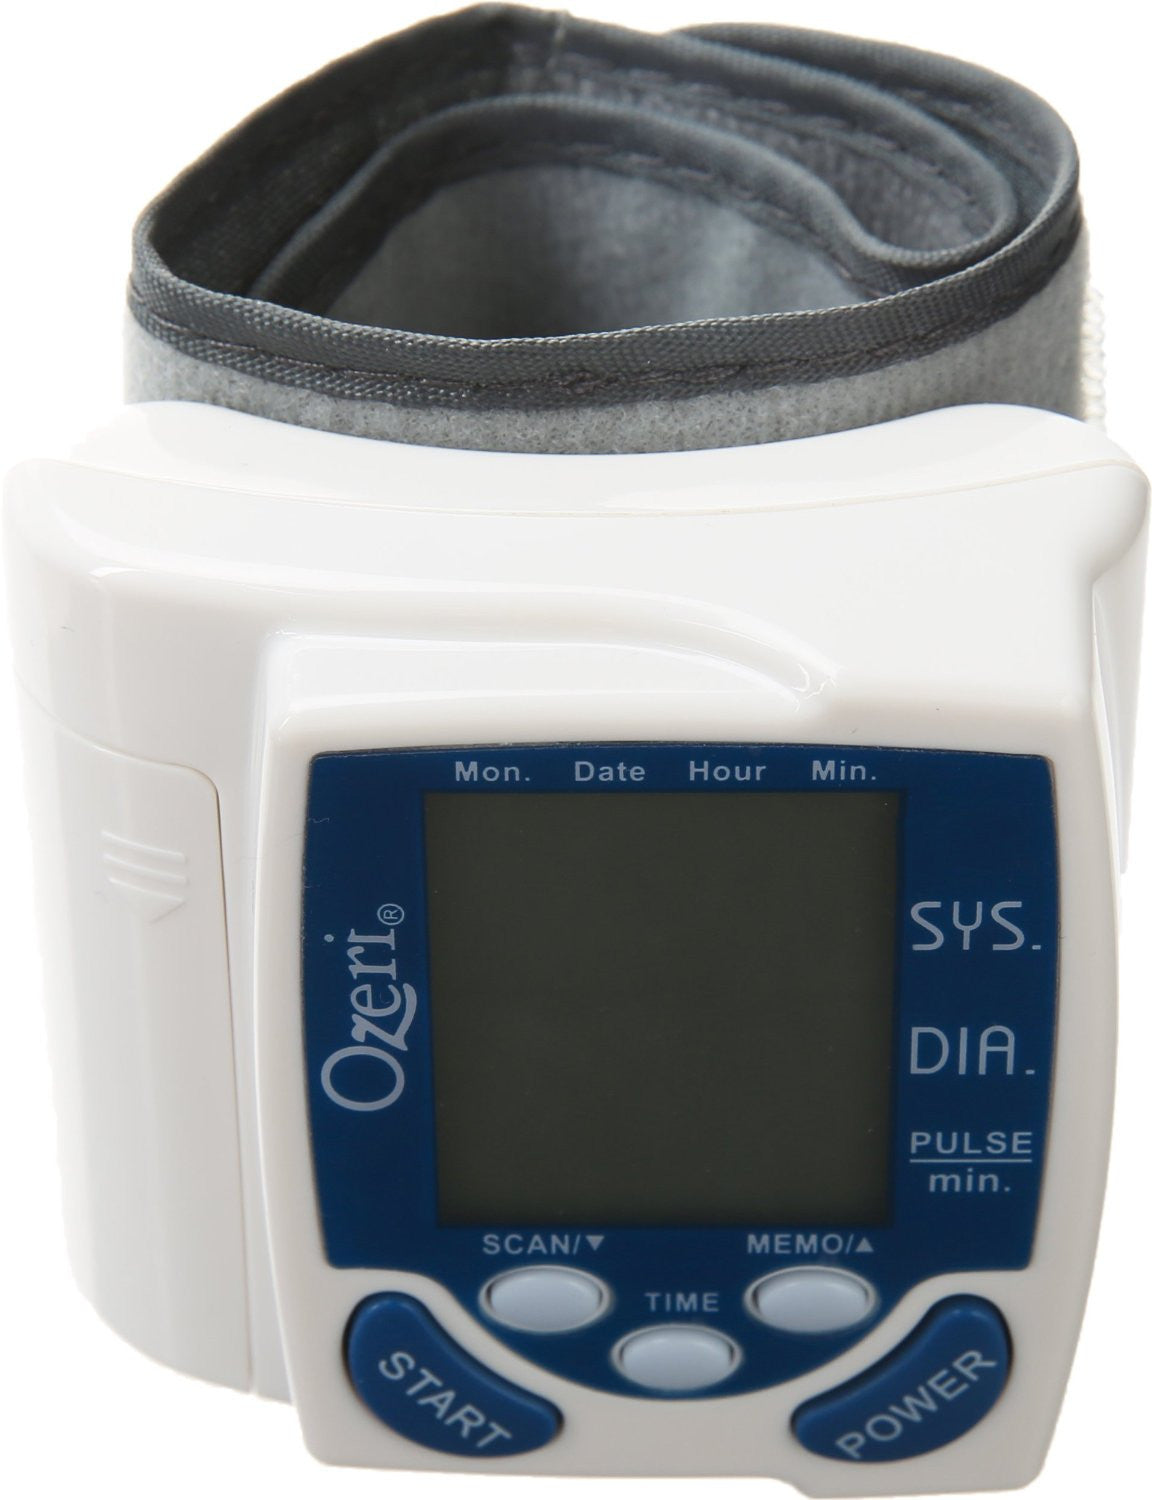 Ozeri CardioTech Travel Series Bp6t Rechargeable Blood Pressure Monitor with Hypertension